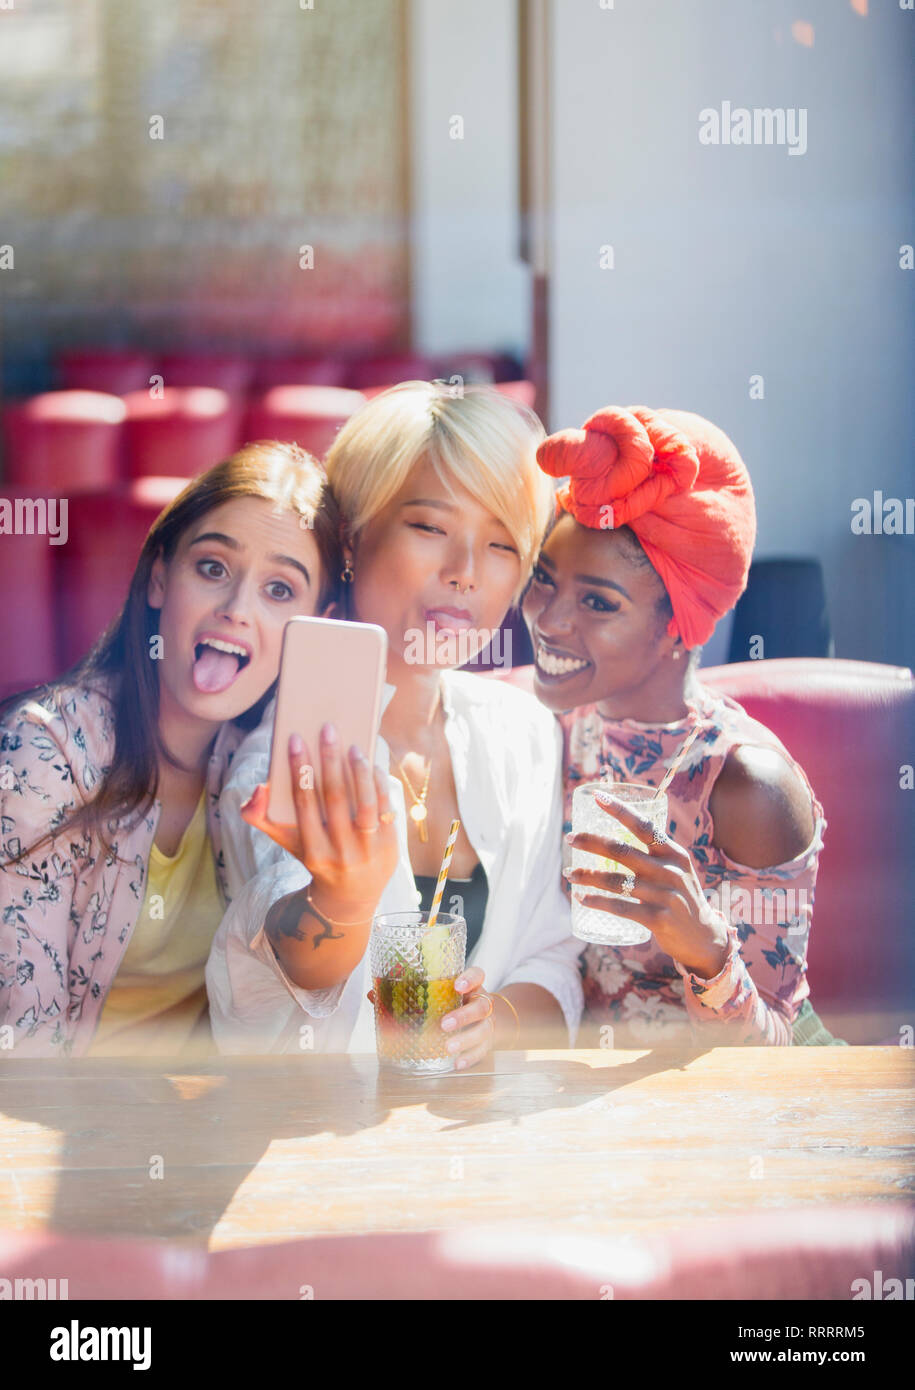 Silly, playful young women friends taking selfie with camera phone in cafe Stock Photo